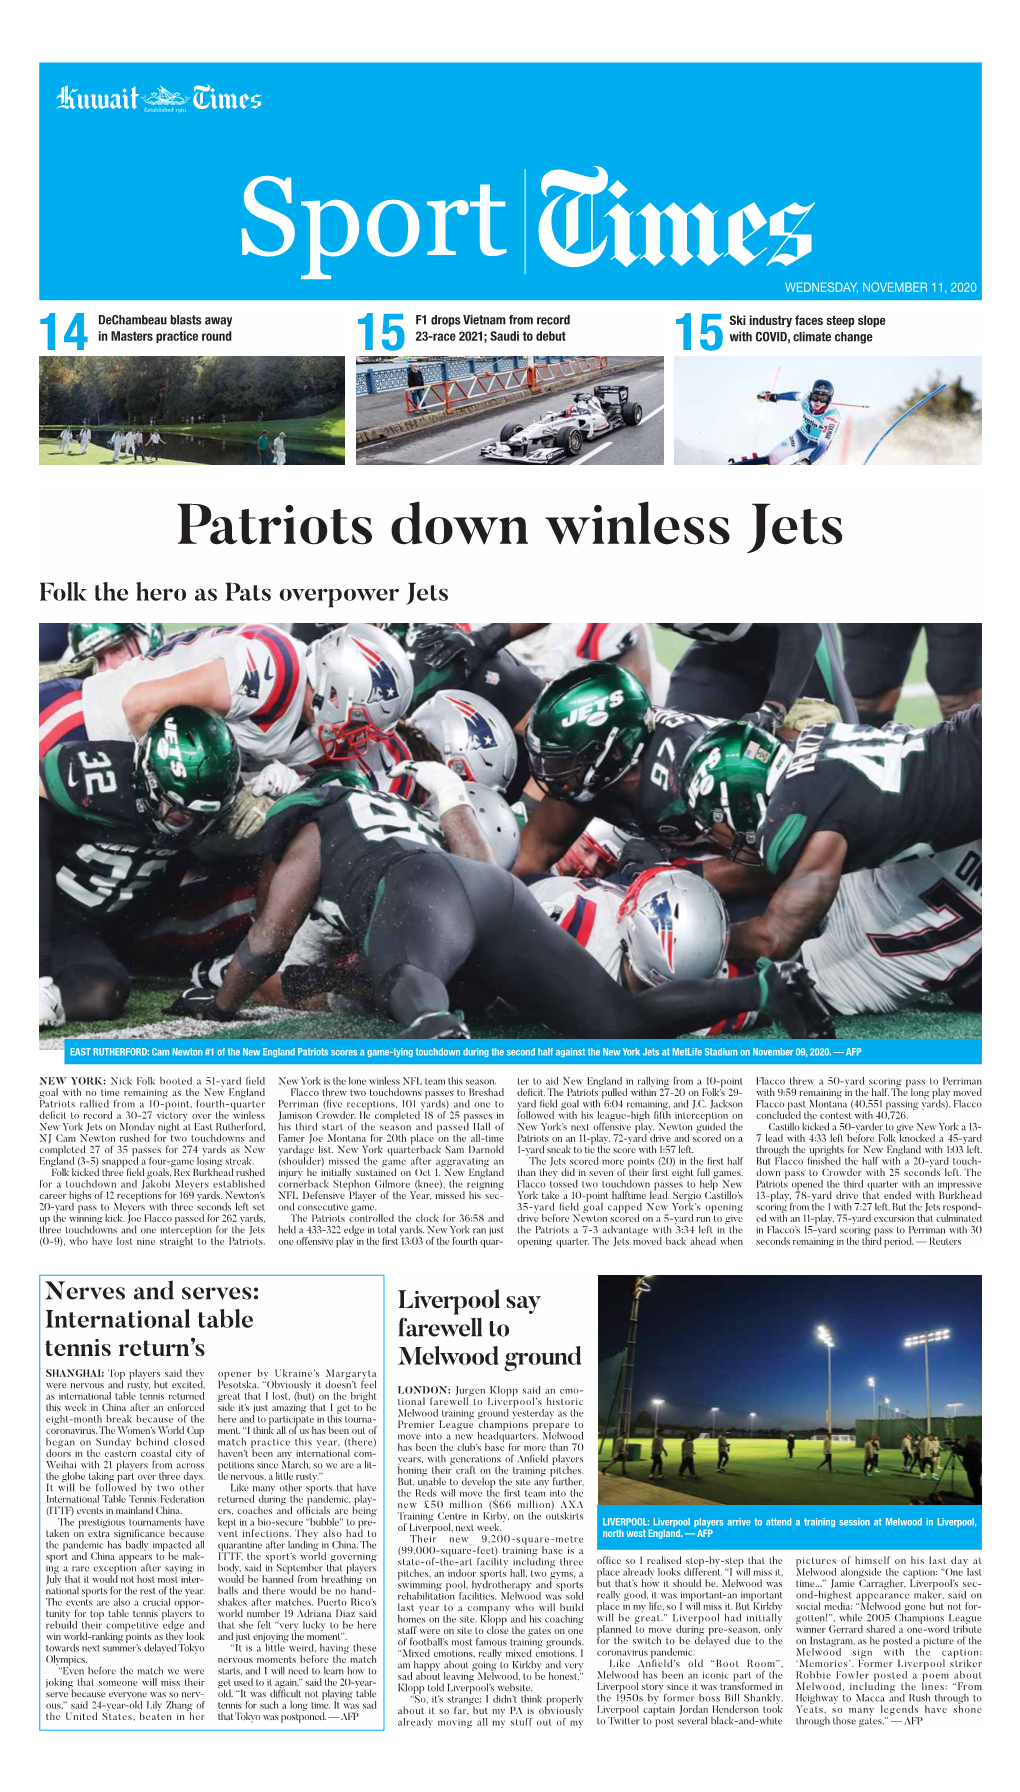 Patriots Down Winless Jets Folk the Hero As Pats Overpower Jets